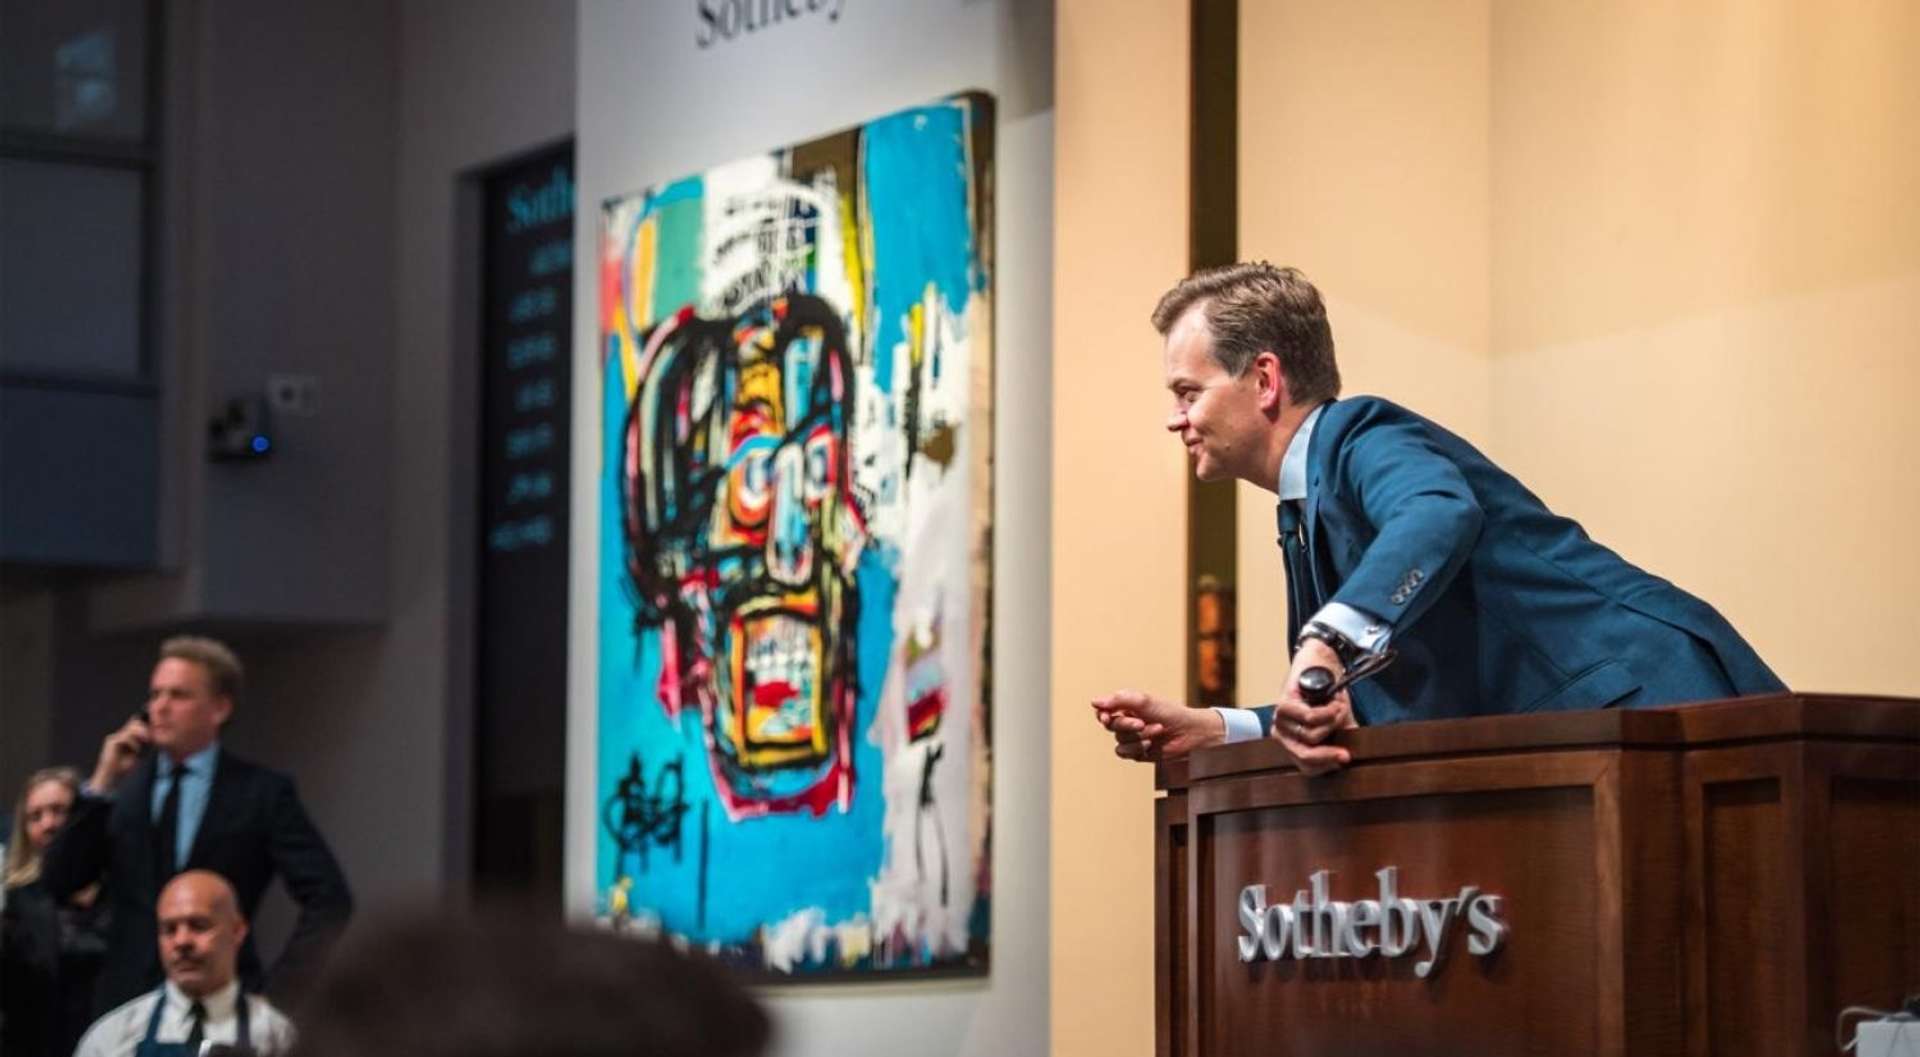 An image showing an auctioneer engaging with the crowd at a Sotheby’s auction. In the background is Basquiat’s Untitled from 1982.